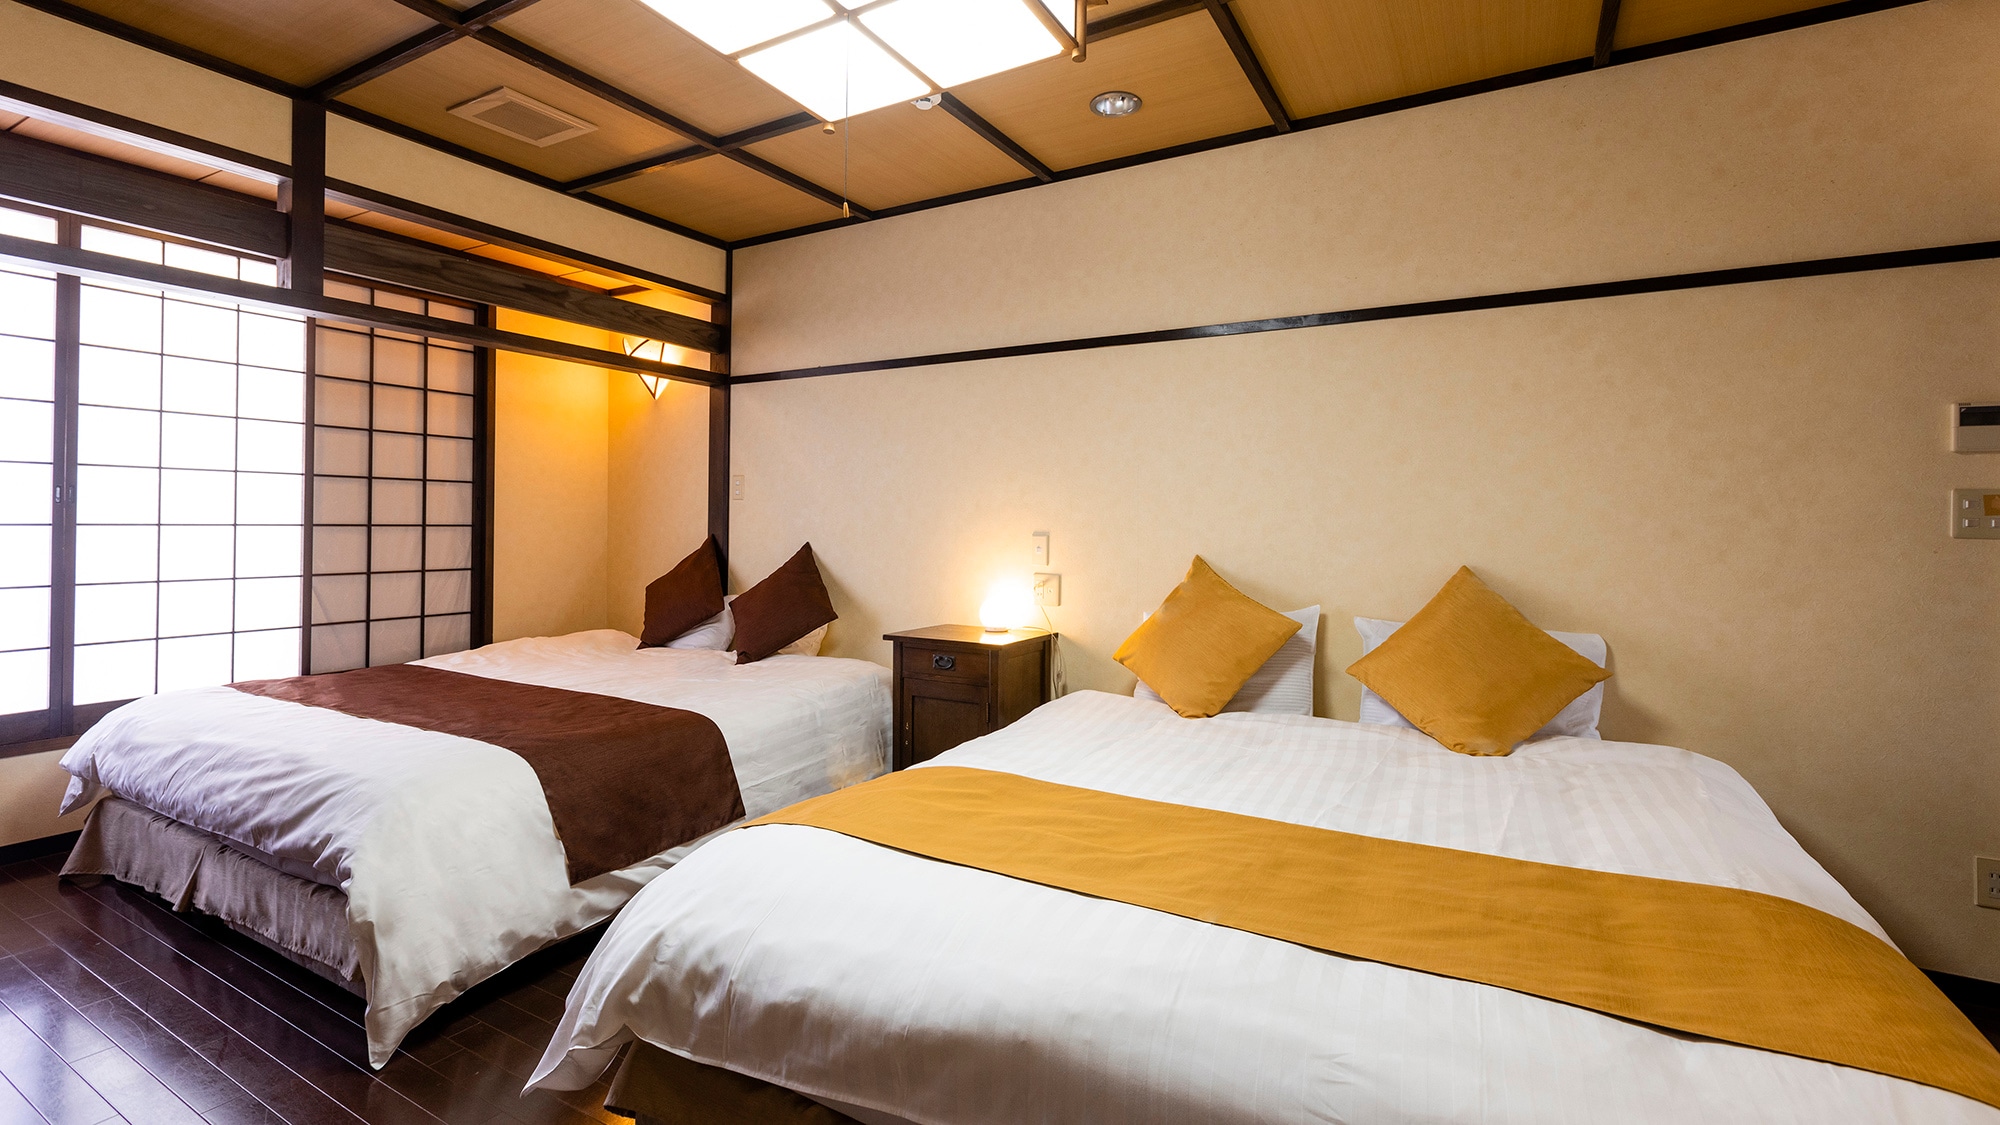 ◆Japanese-Western special room ◆Mini bar benefits included ◆81 square meters/bath included Up to 6 people (maximum square meter) can be accommodated in the hotel's guest rooms